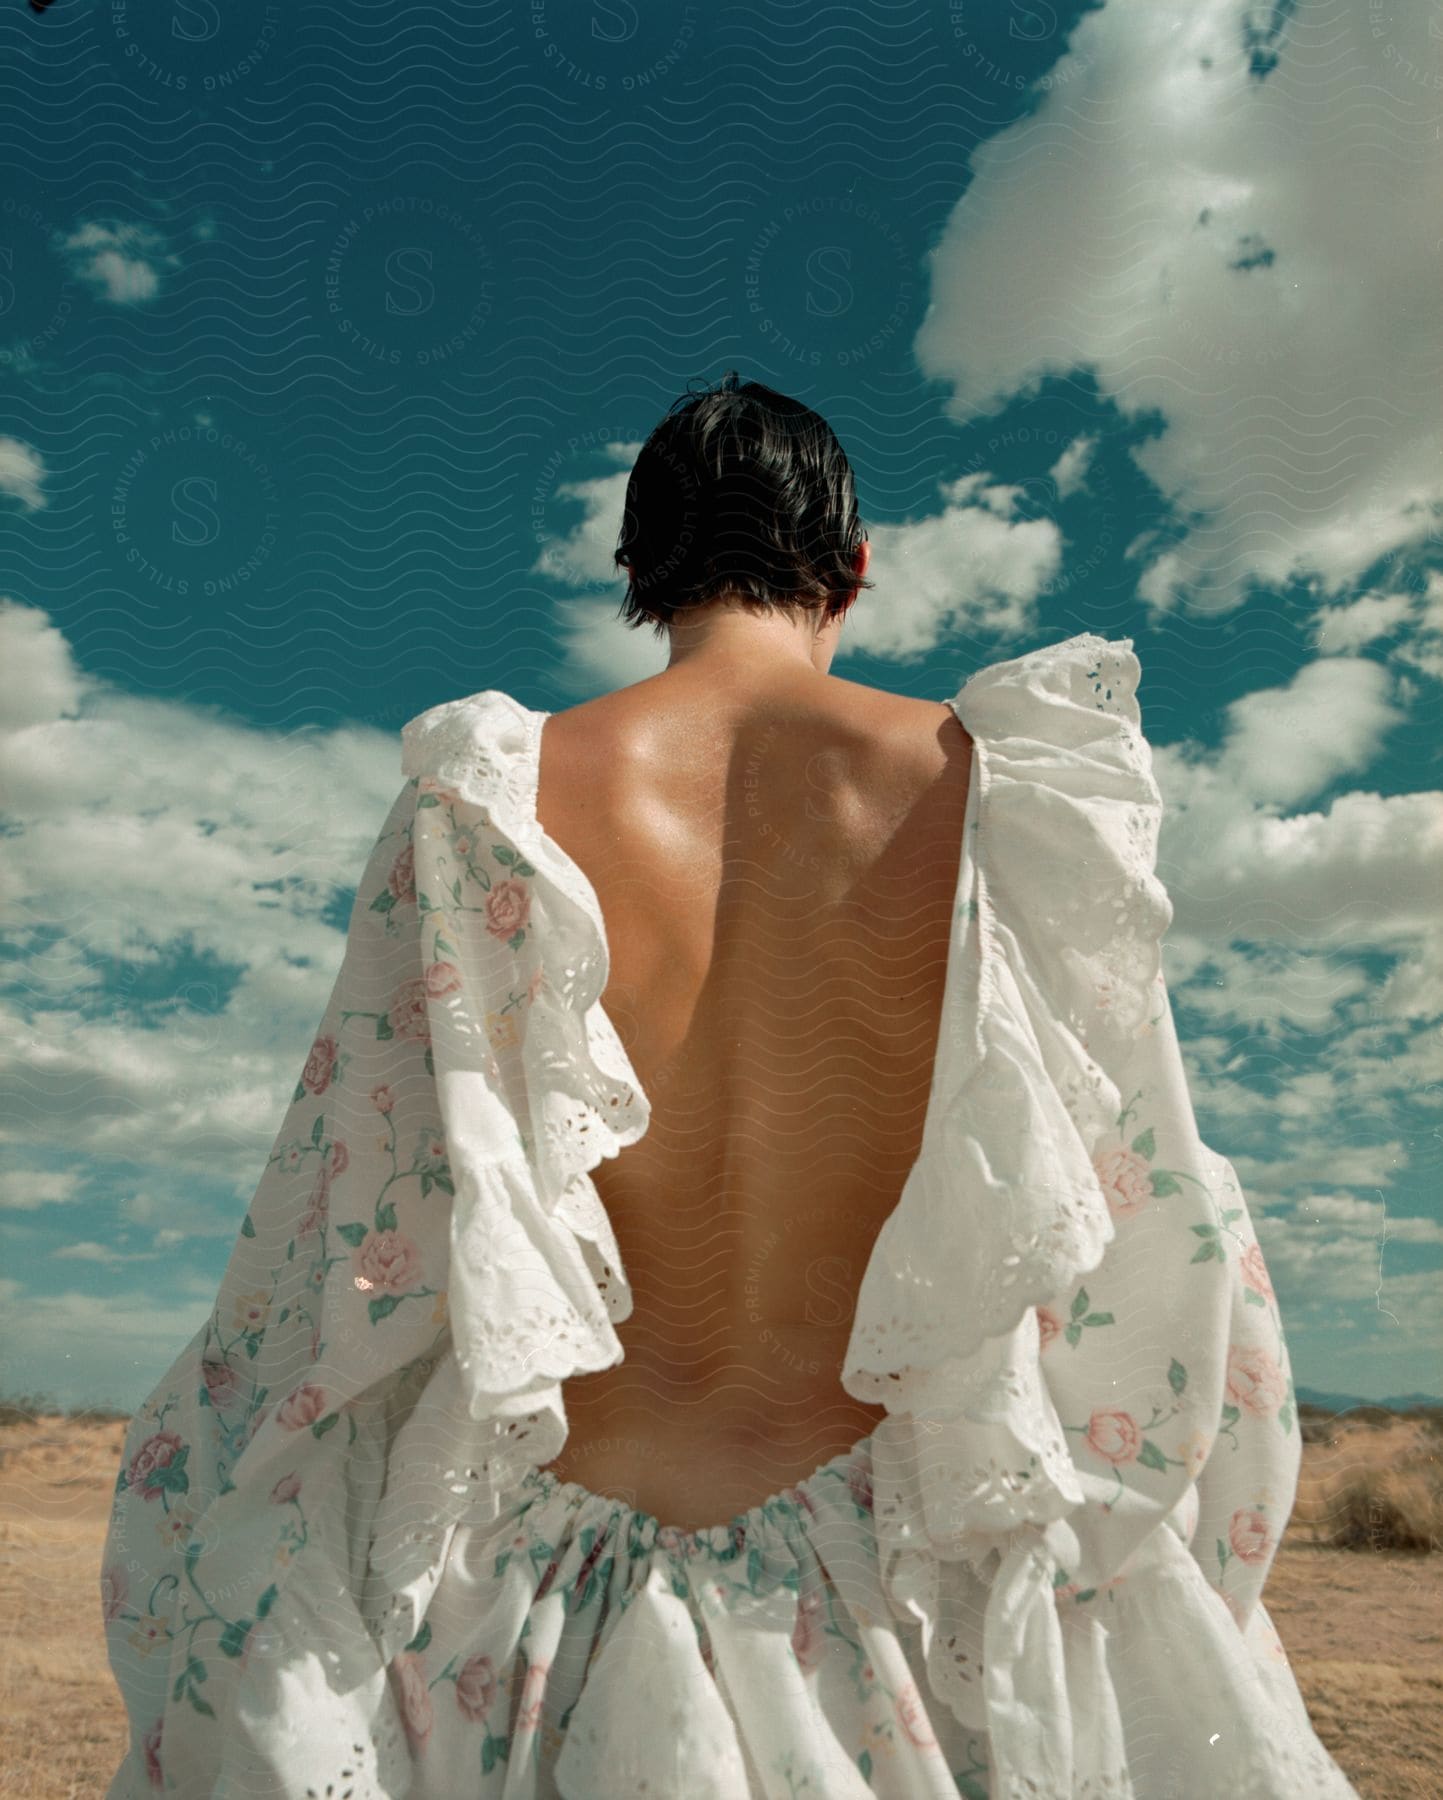 A woman wearing a ruffled backless outfit stands on sand on a cloudy day